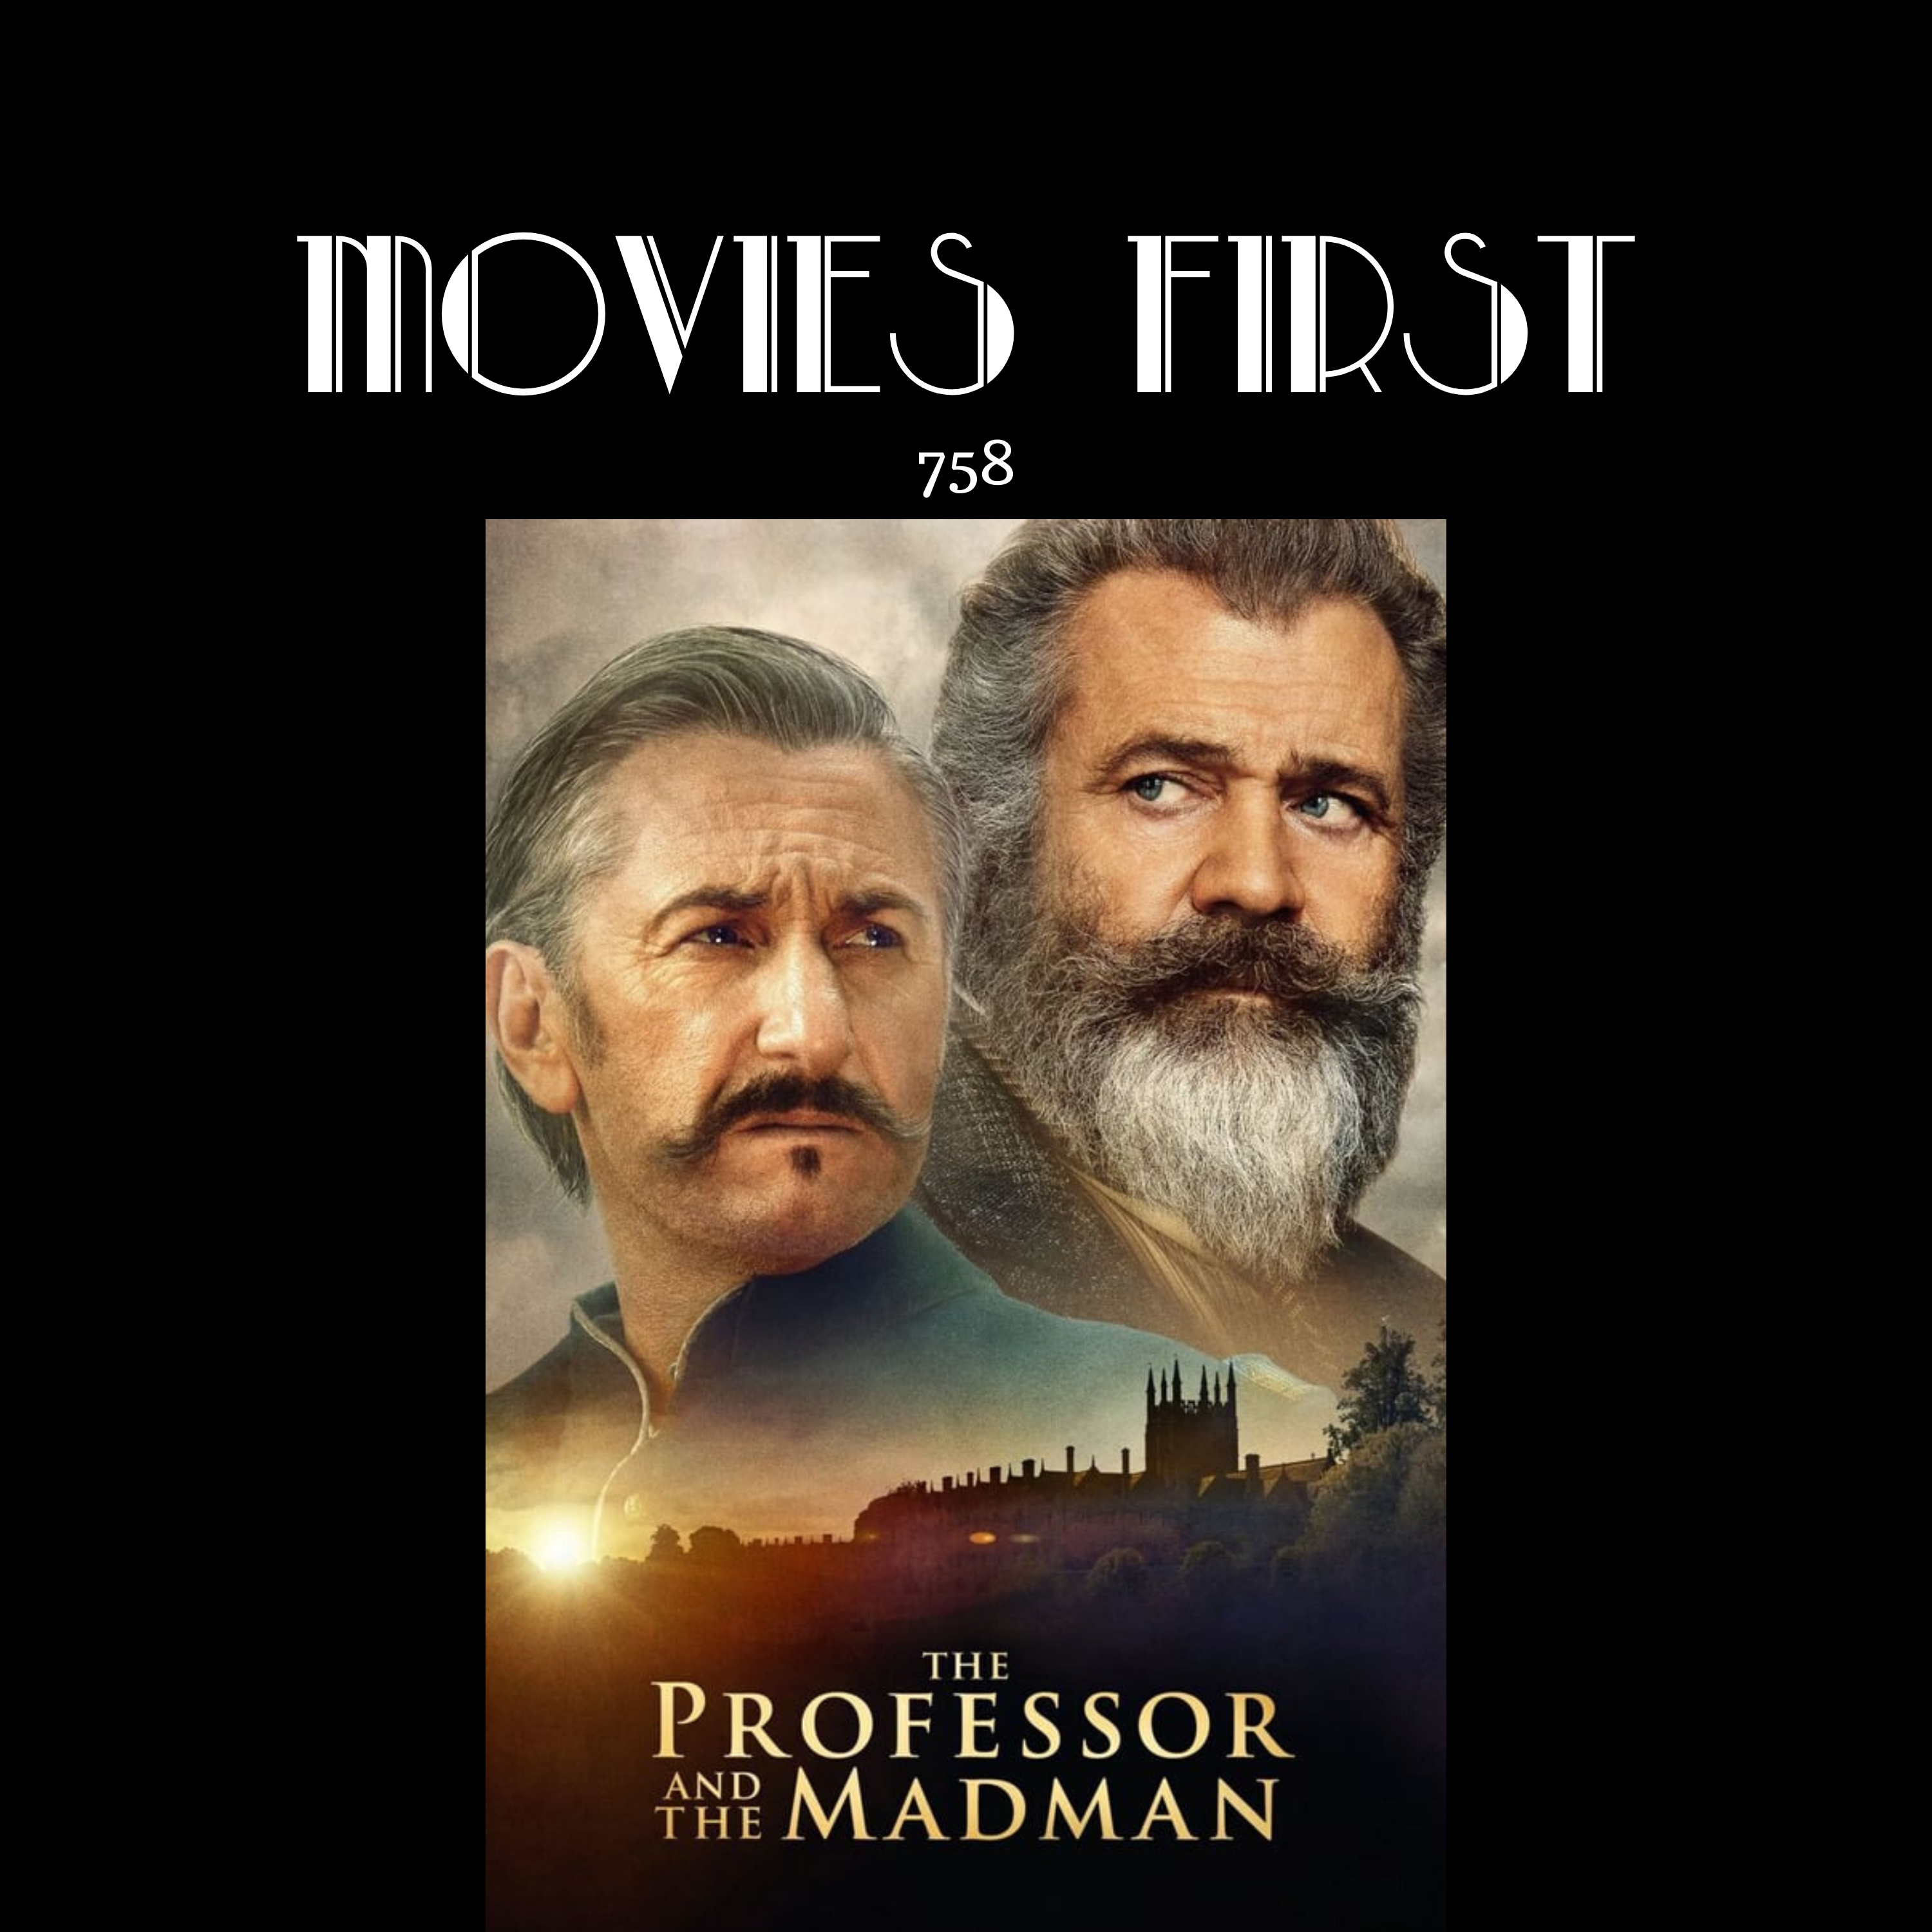 758: The Professor and the Madman (Biography, Drama) (the @MoviesFirst review)